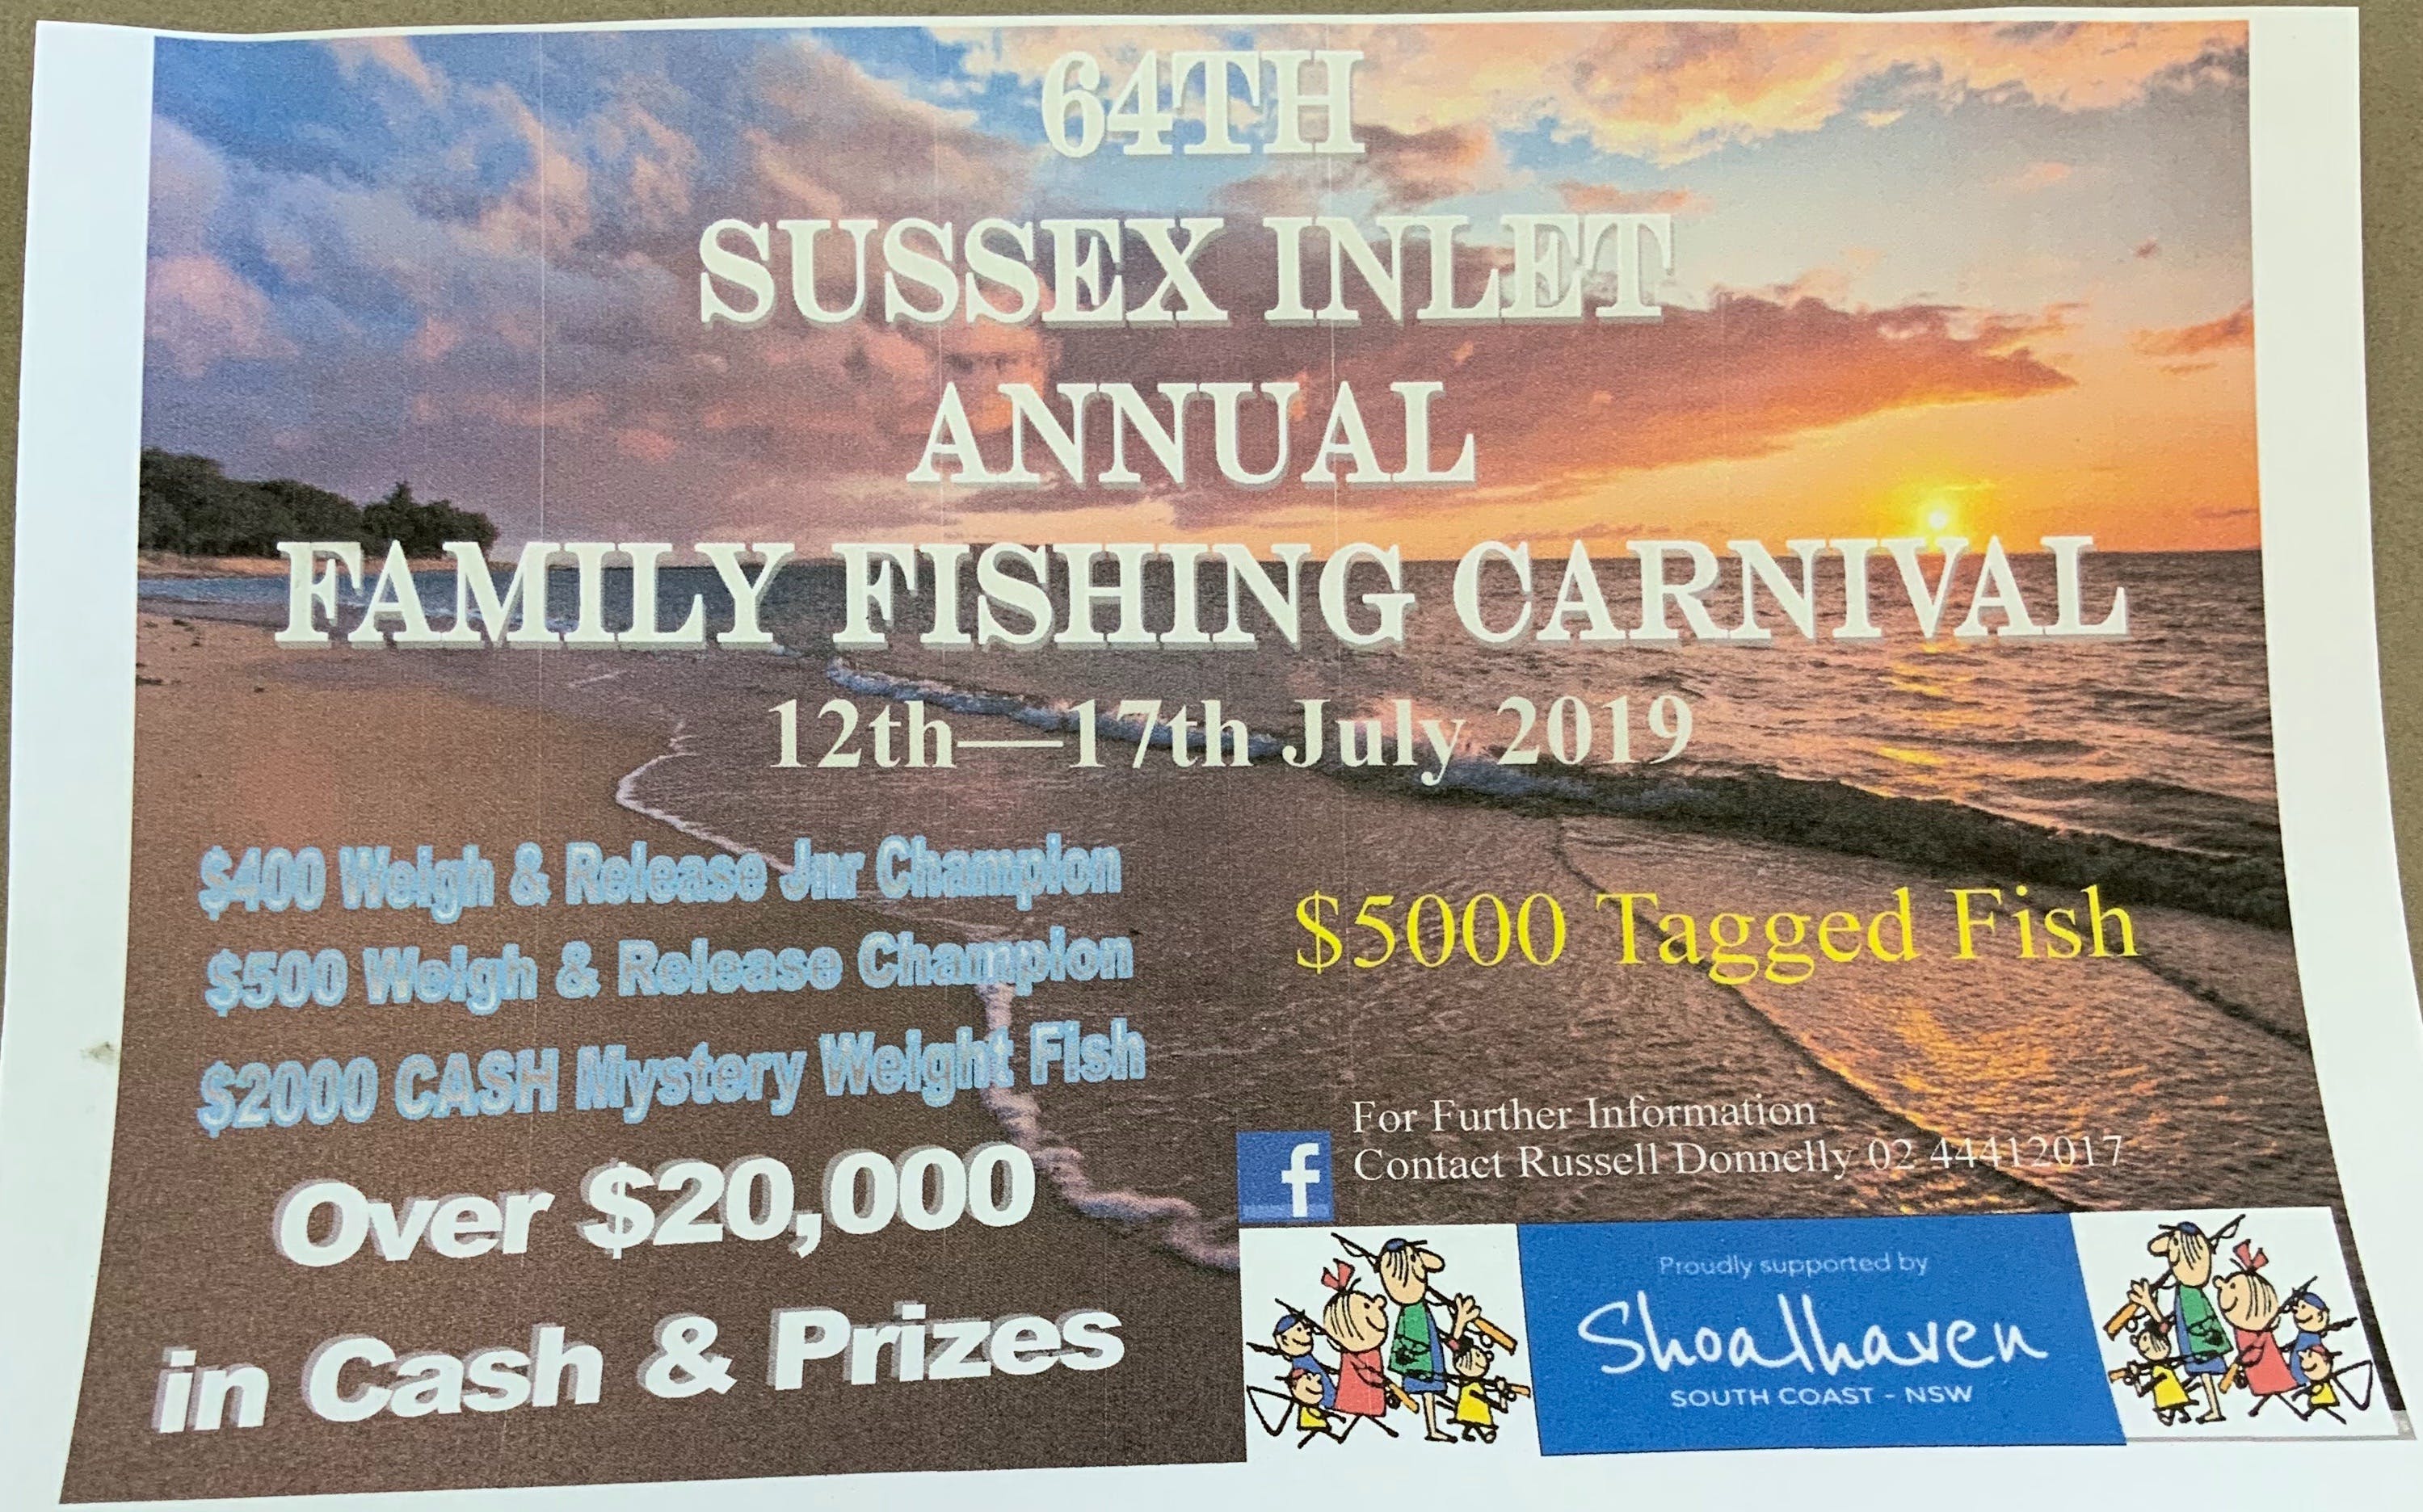 The Sussex Inlet Annual Family Fishing Carnival - Accommodation Resorts